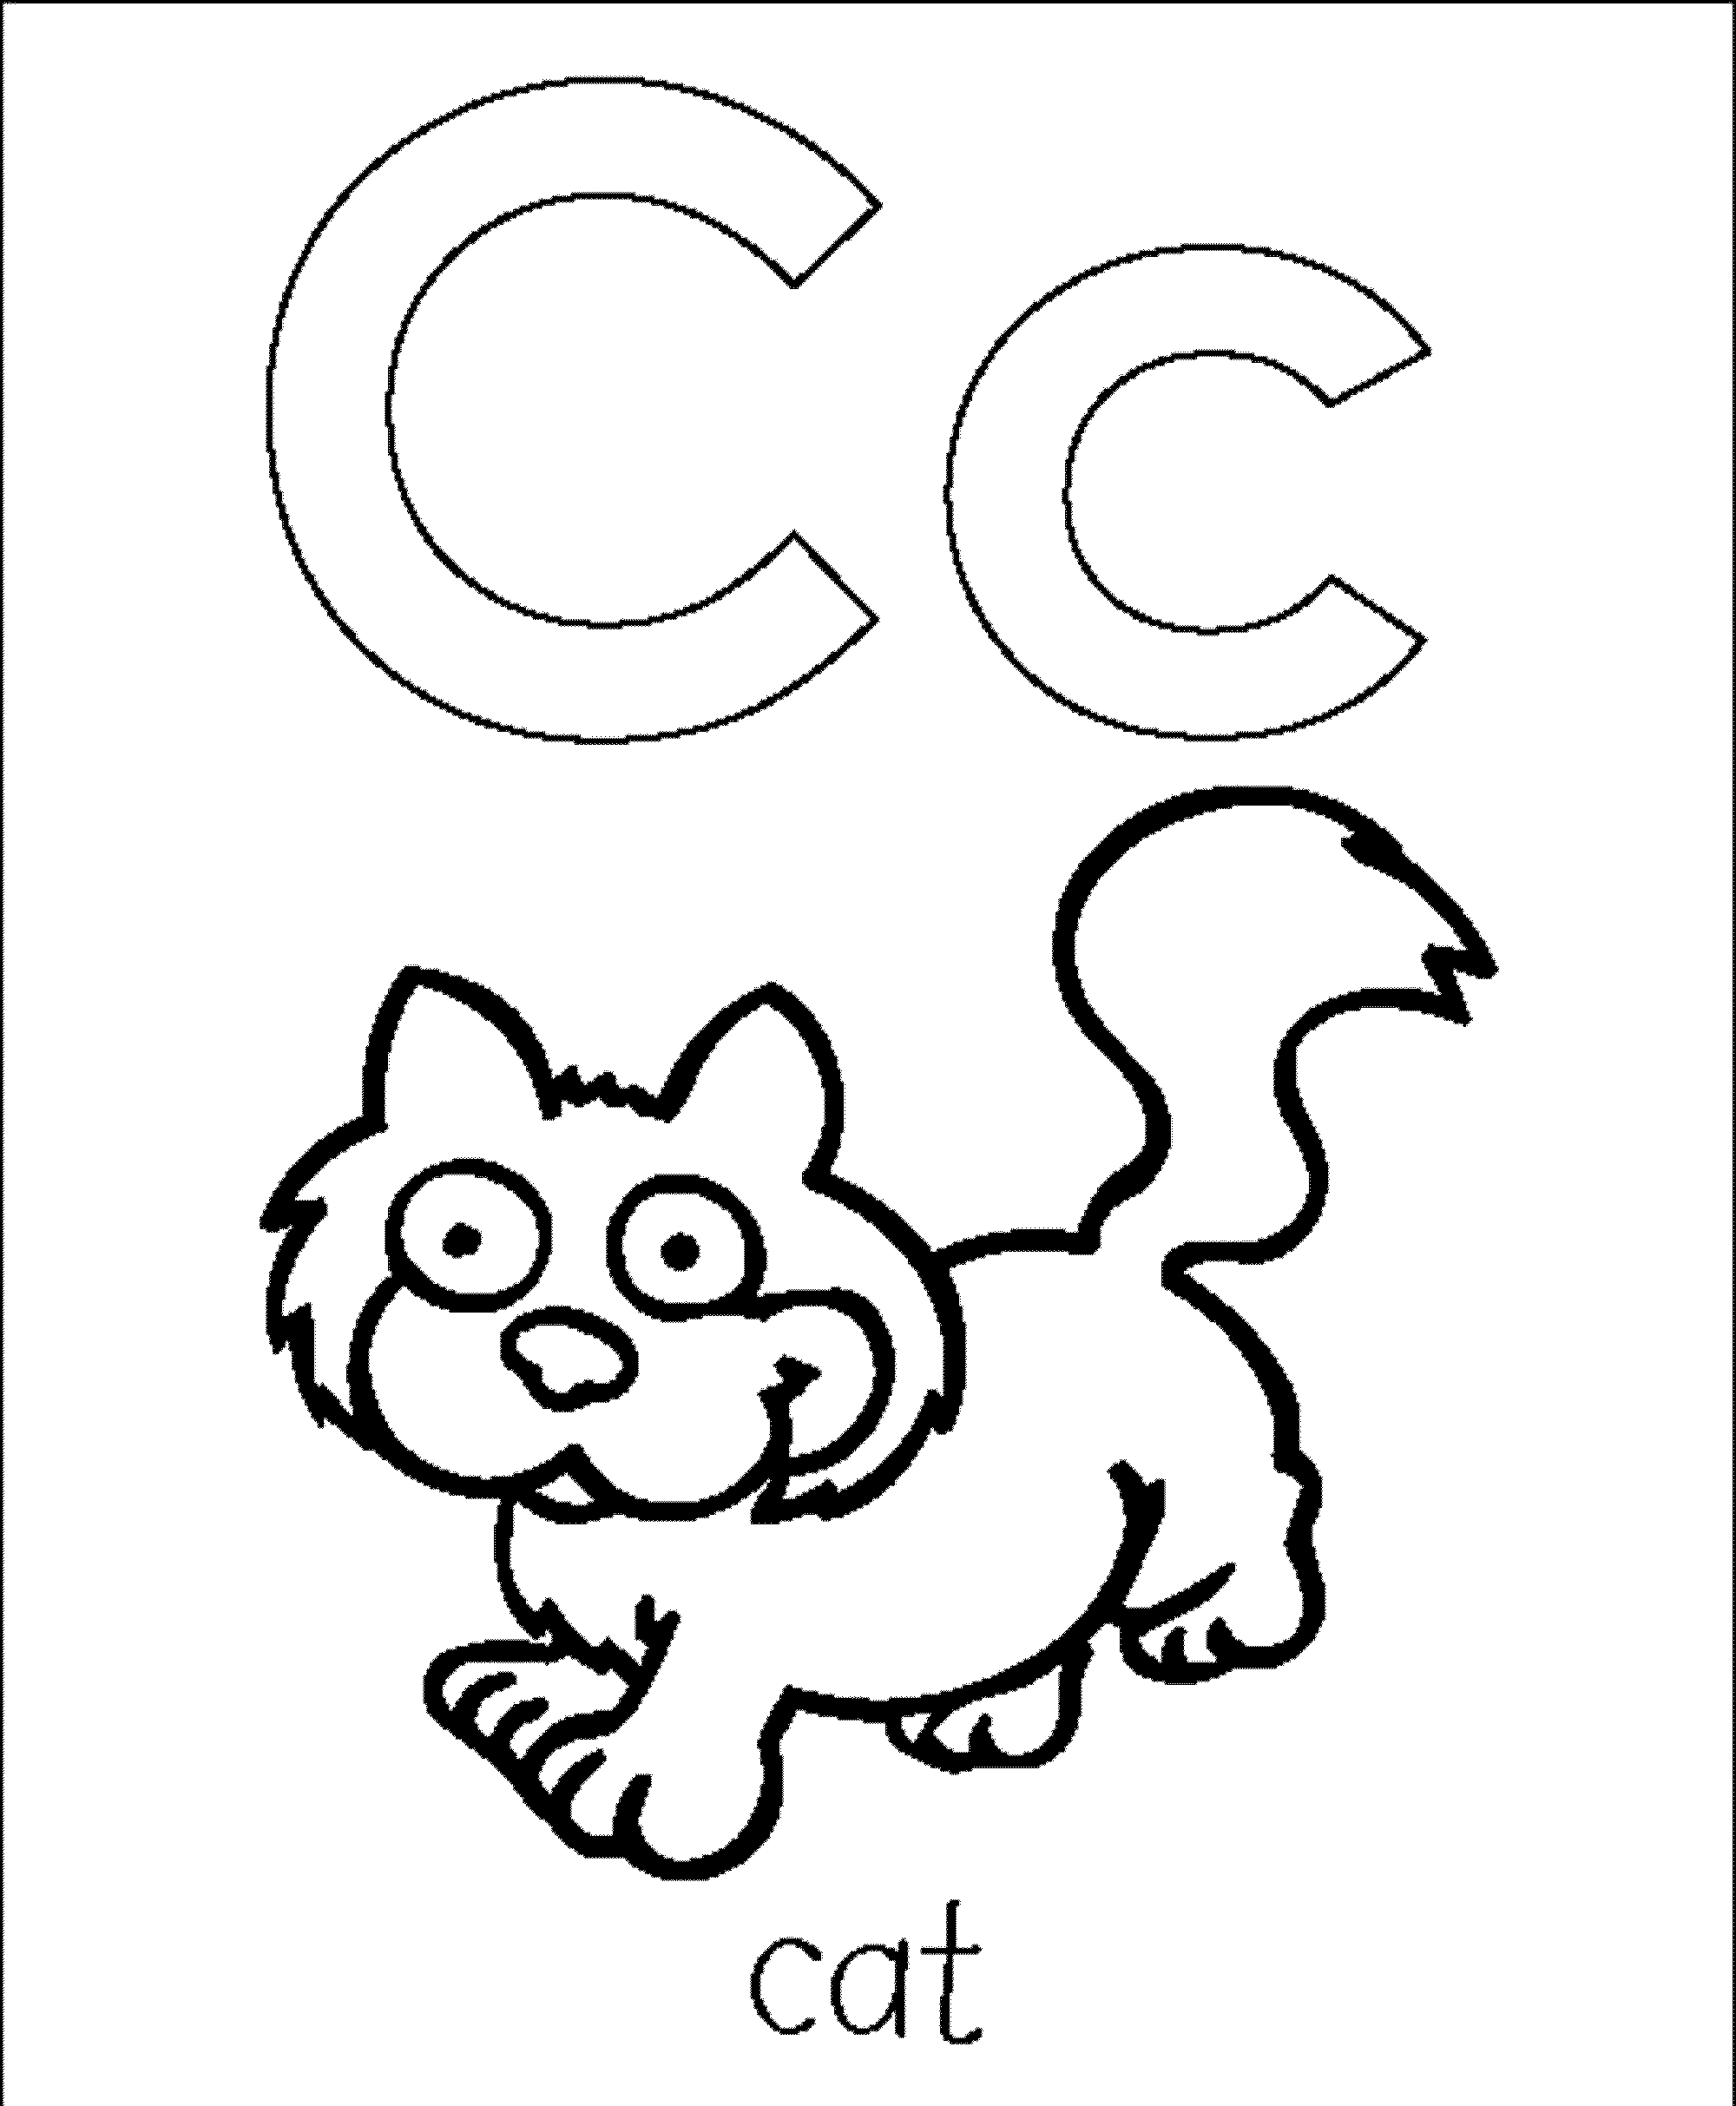 abc blocks coloring pages - Printable Kids Colouring Pages